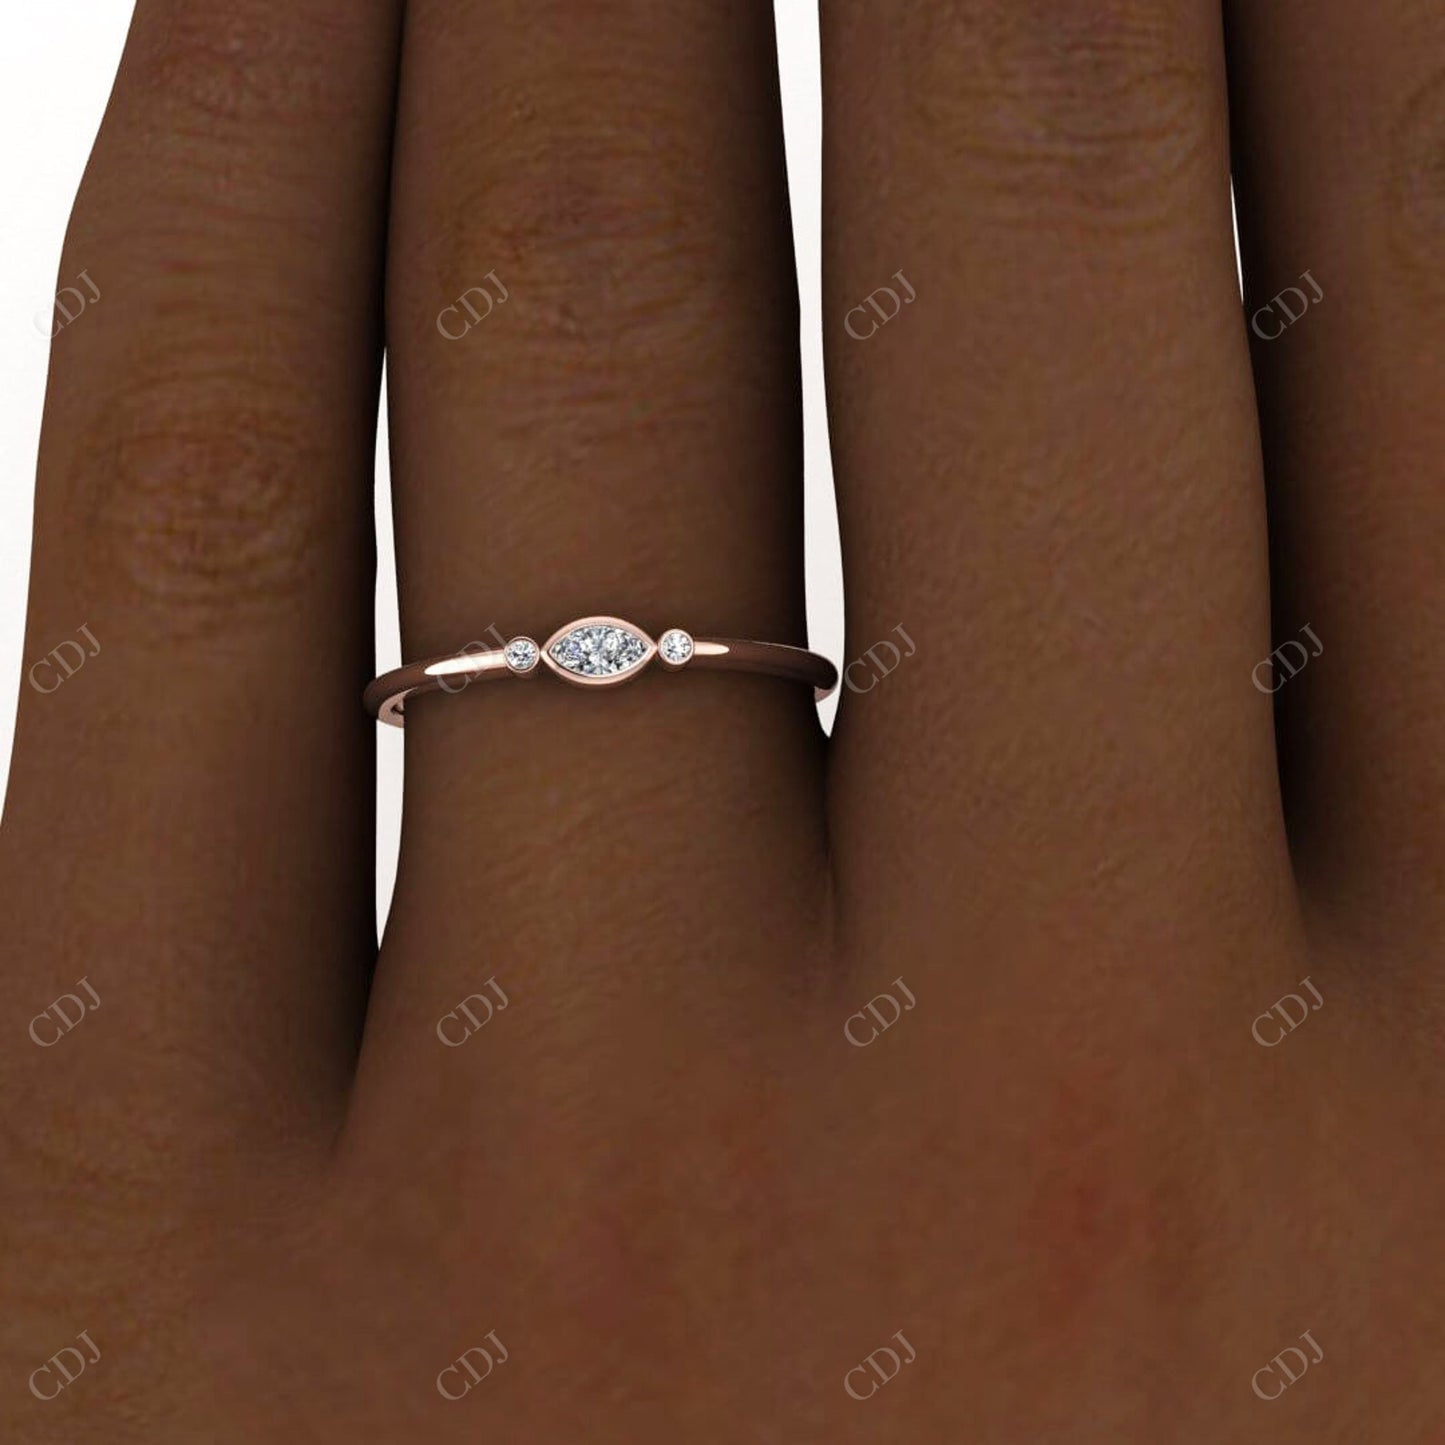 0.1CTW Round and Marquise Cut Diamond Ring